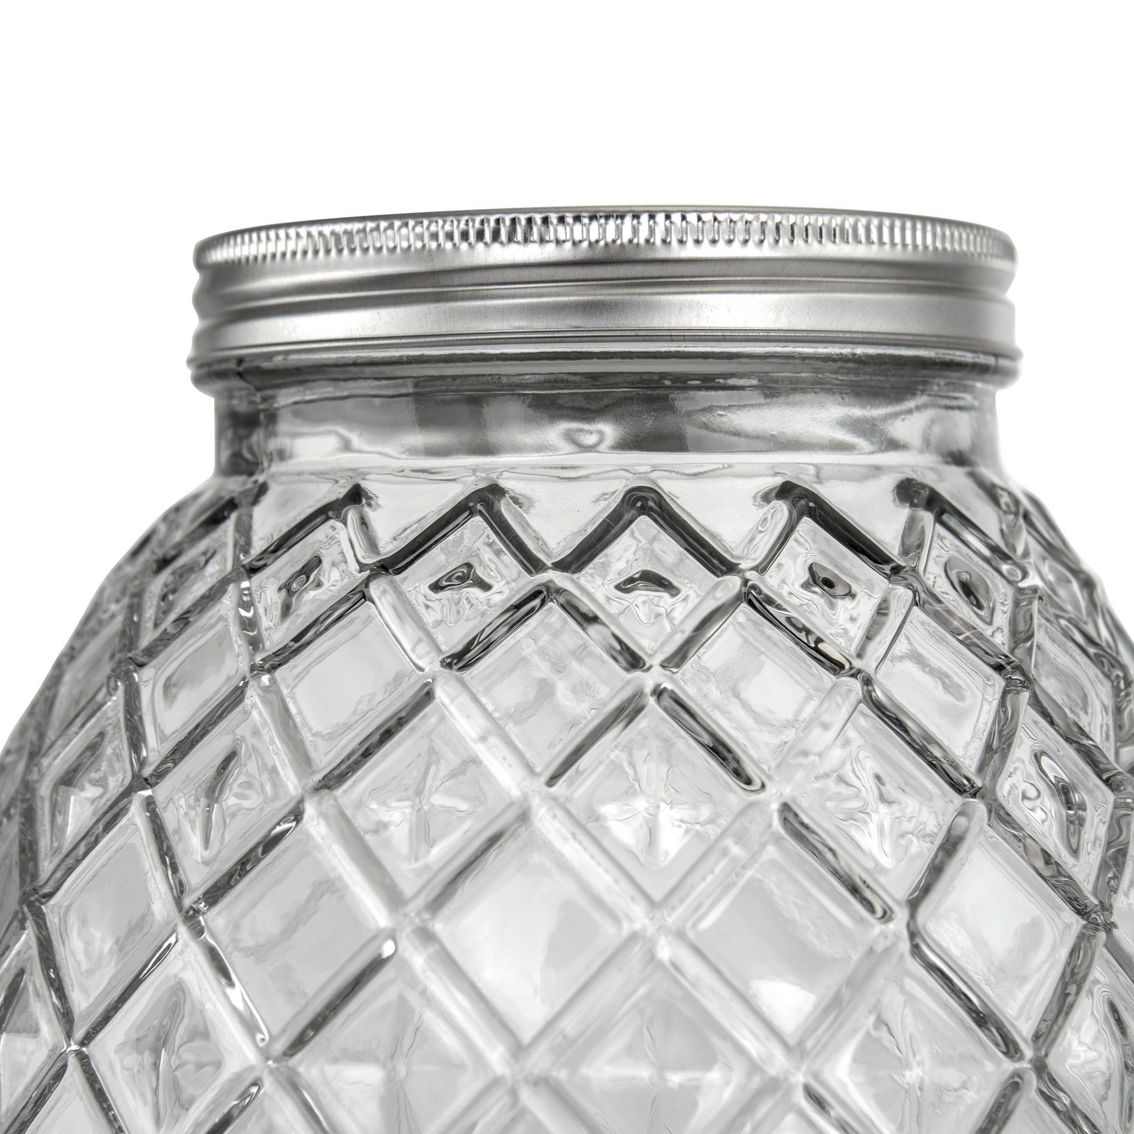 Gibson Home 1.2 Gallon Pineapple Clear Glass Drink Dispenser - Image 3 of 5